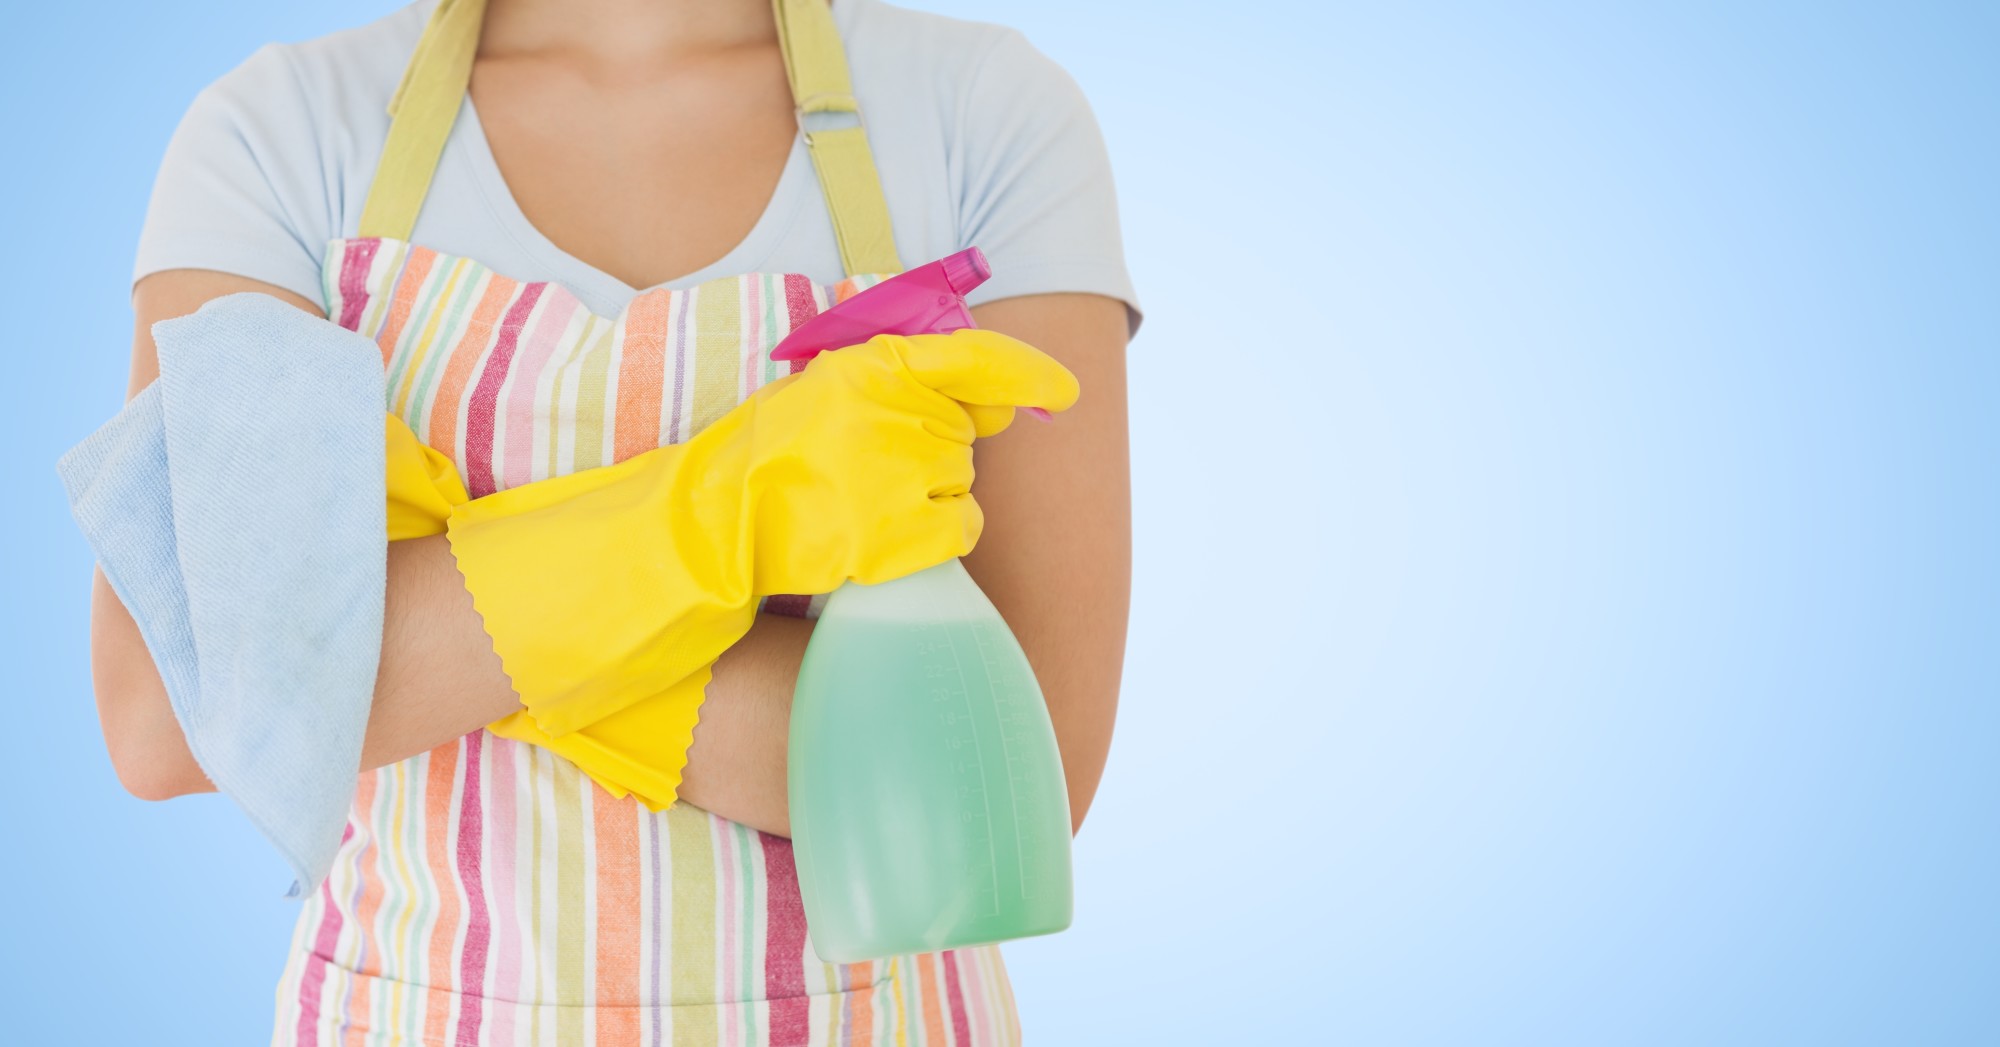 deep-cleaning-vs-regular-house-cleaning-what-you-re-actually-missing